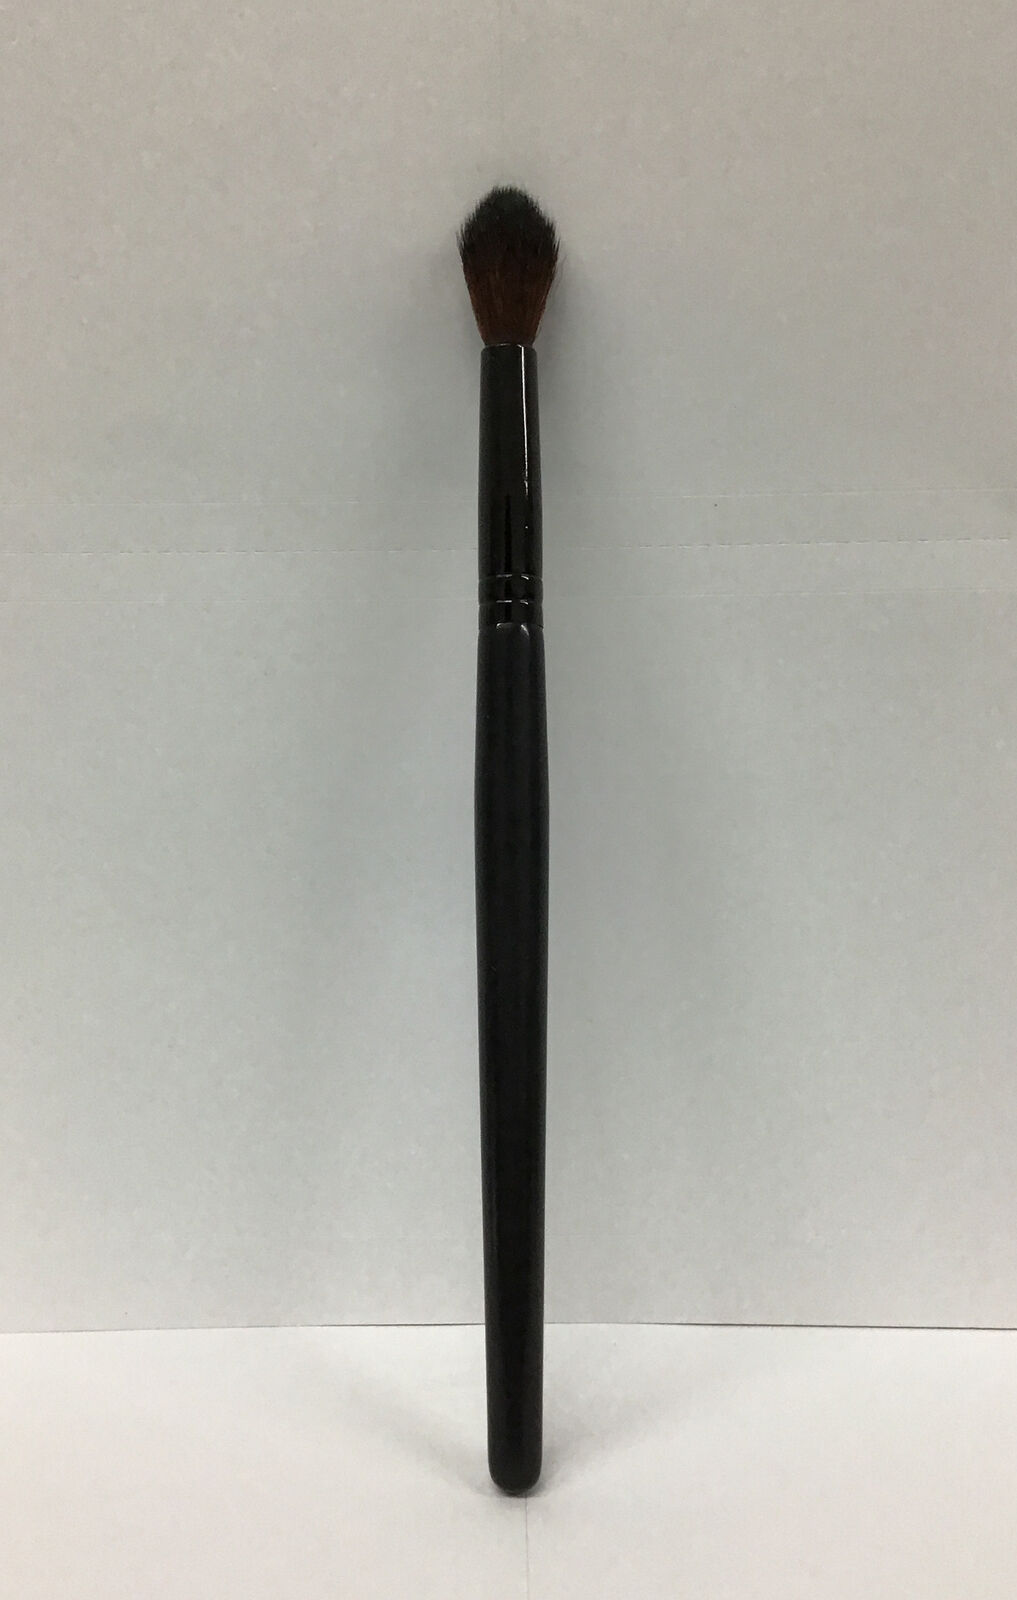 Laura Mercier - Finishing Pony Tail Brush -, As Pictured, No Box. 